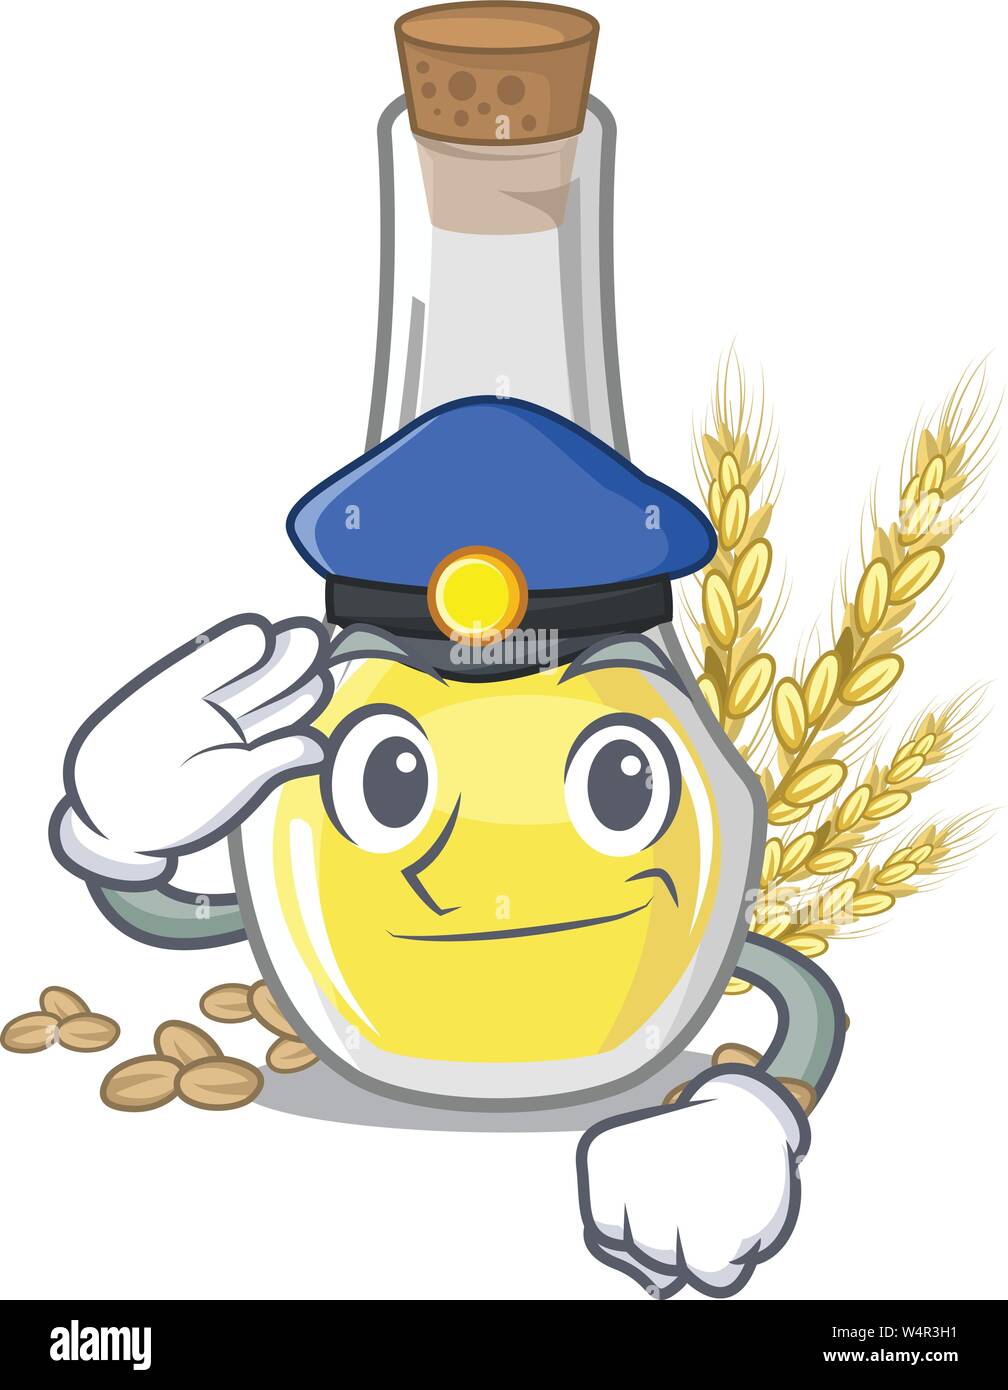 Police wheat germ oil with isolated character vector illustration Stock Vector